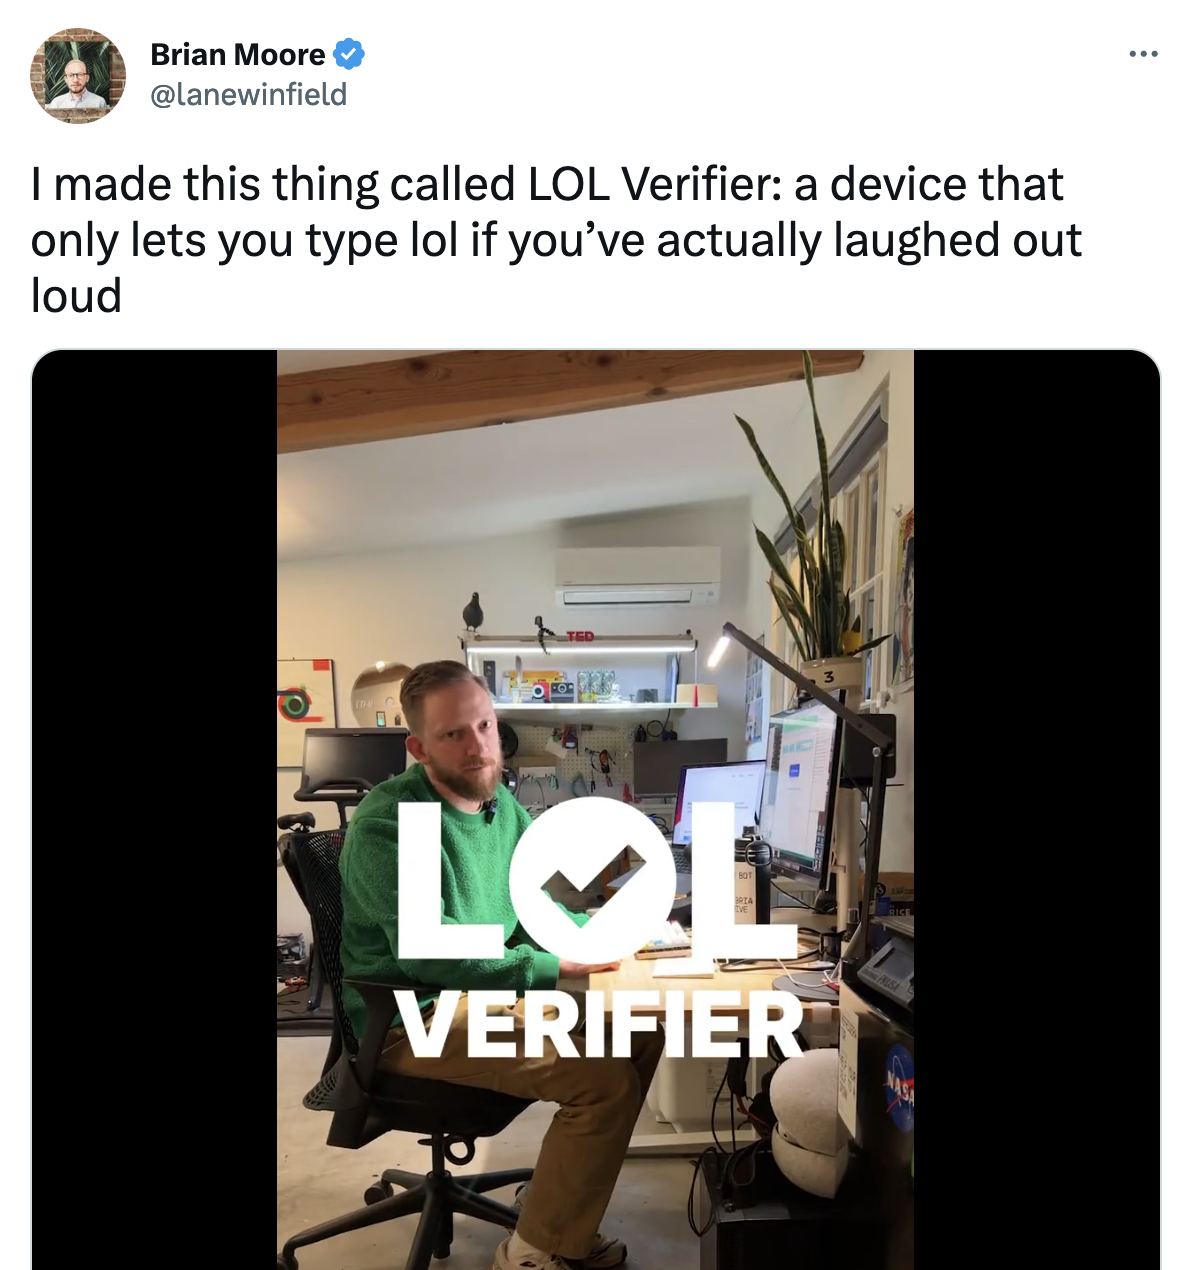 Tweet: I made this thing called LOL Verifier: a device that only lets you type lol if you’ve actually laughed out loud